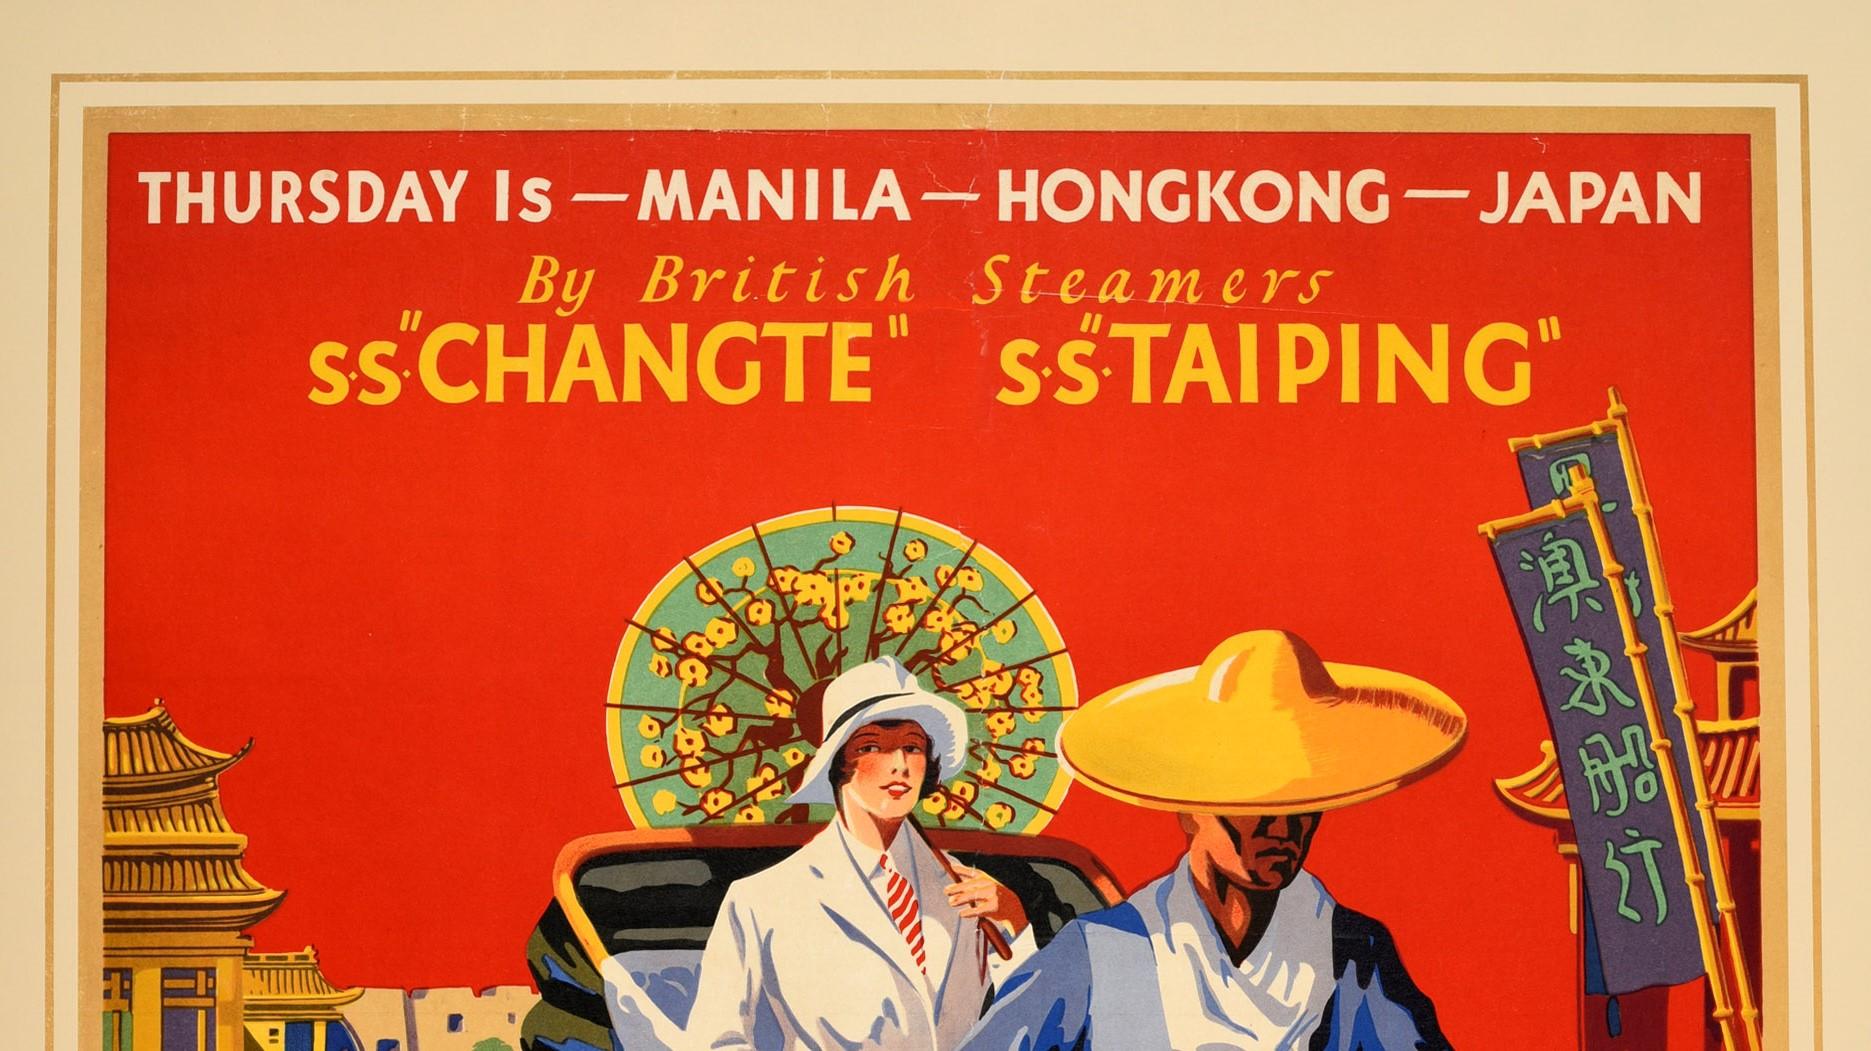 Original vintage travel poster advertising A.O Line cruise ship services to Thursday Island - Manila - Hong Kong - Japan by British Steamers SS Changte and SS Taiping. Colourful design featuring a man wearing a wide brimmed hat pulling a smartly